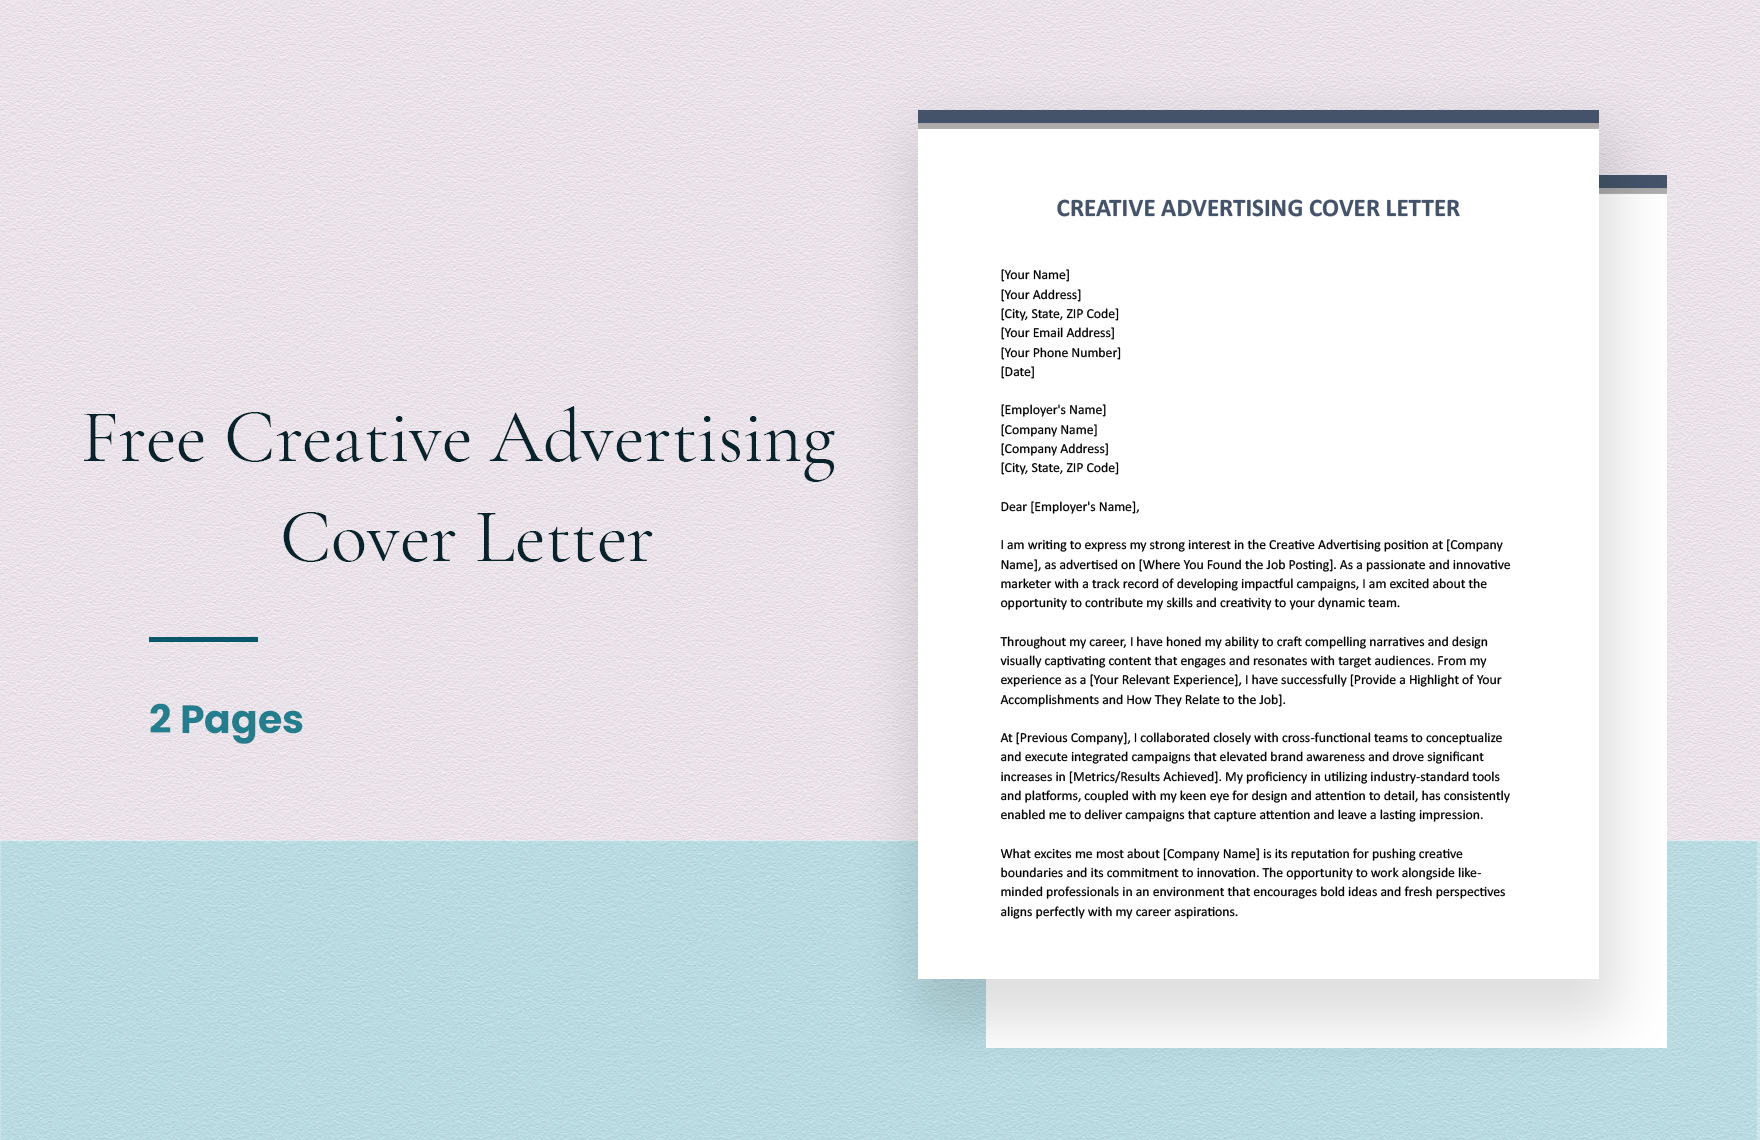 Creative Advertising Cover Letter